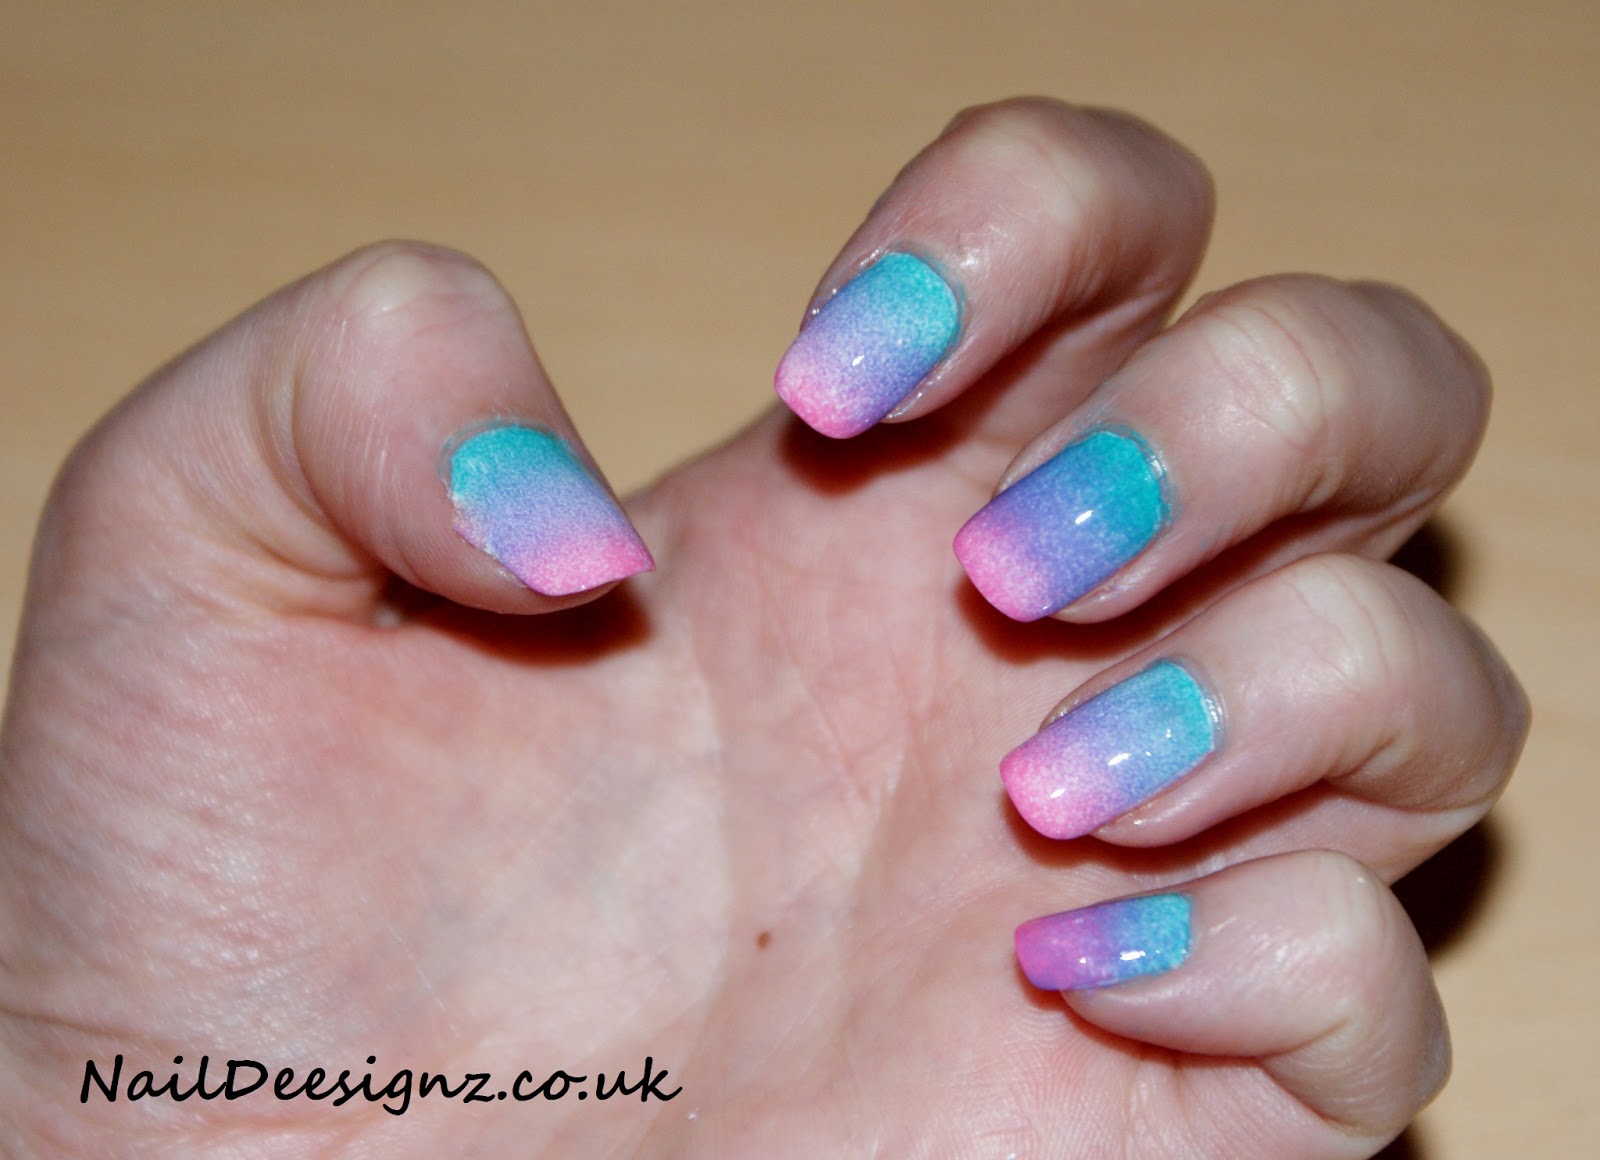 1. Gradient Ombre Nail Art Tutorial - wide 6